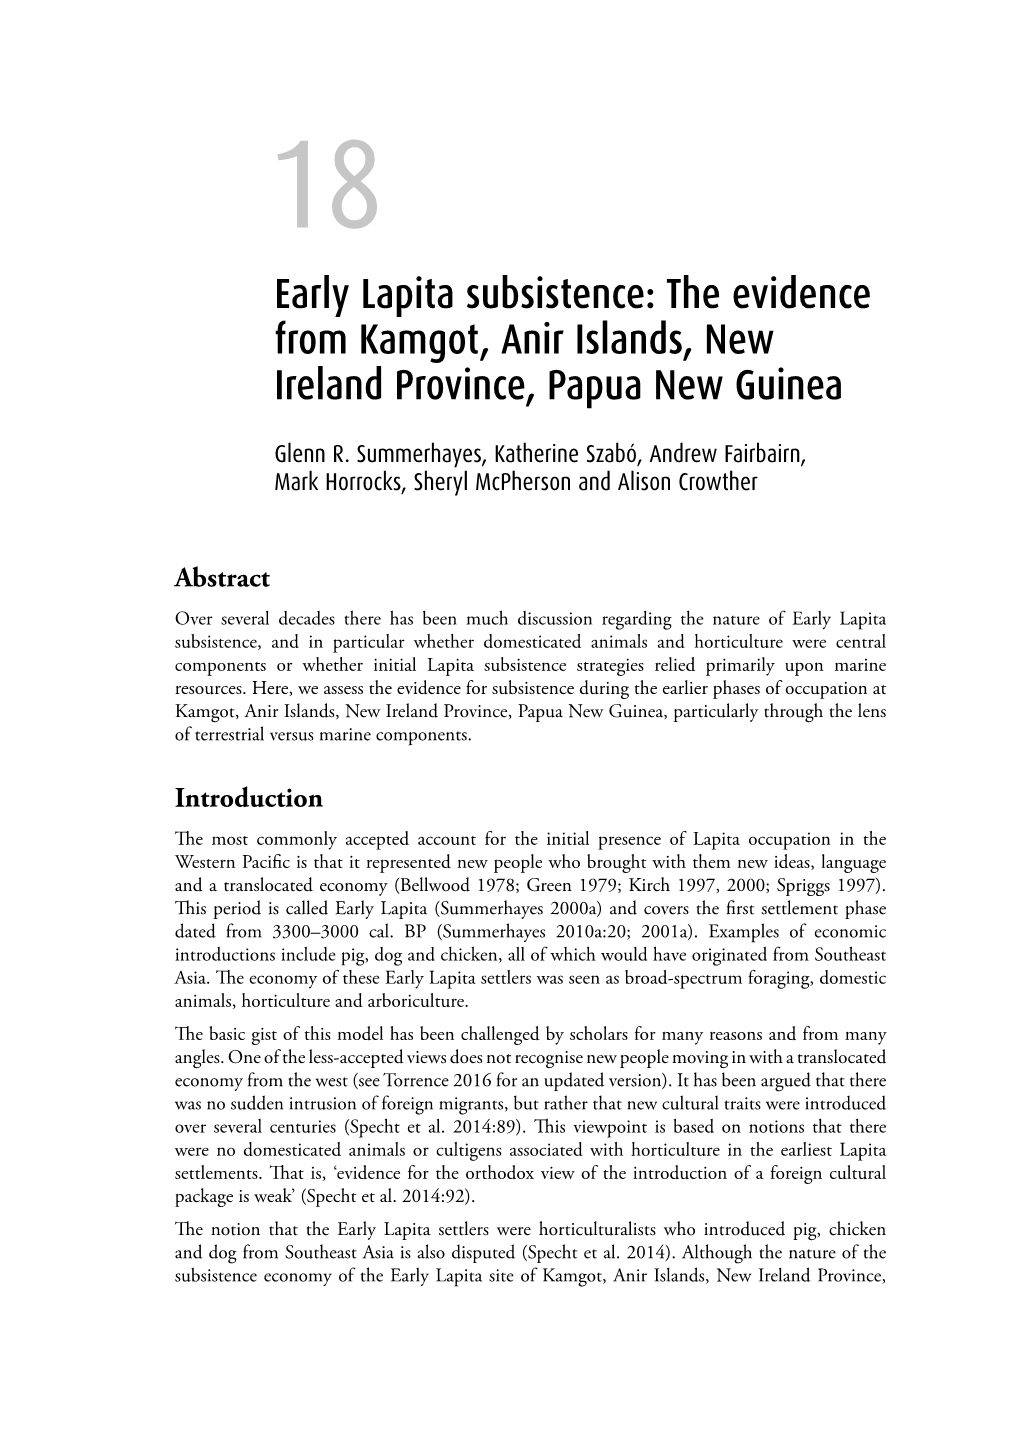 Early Lapita Subsistence: the Evidence from Kamgot, Anir Islands, New Ireland Province, Papua New Guinea